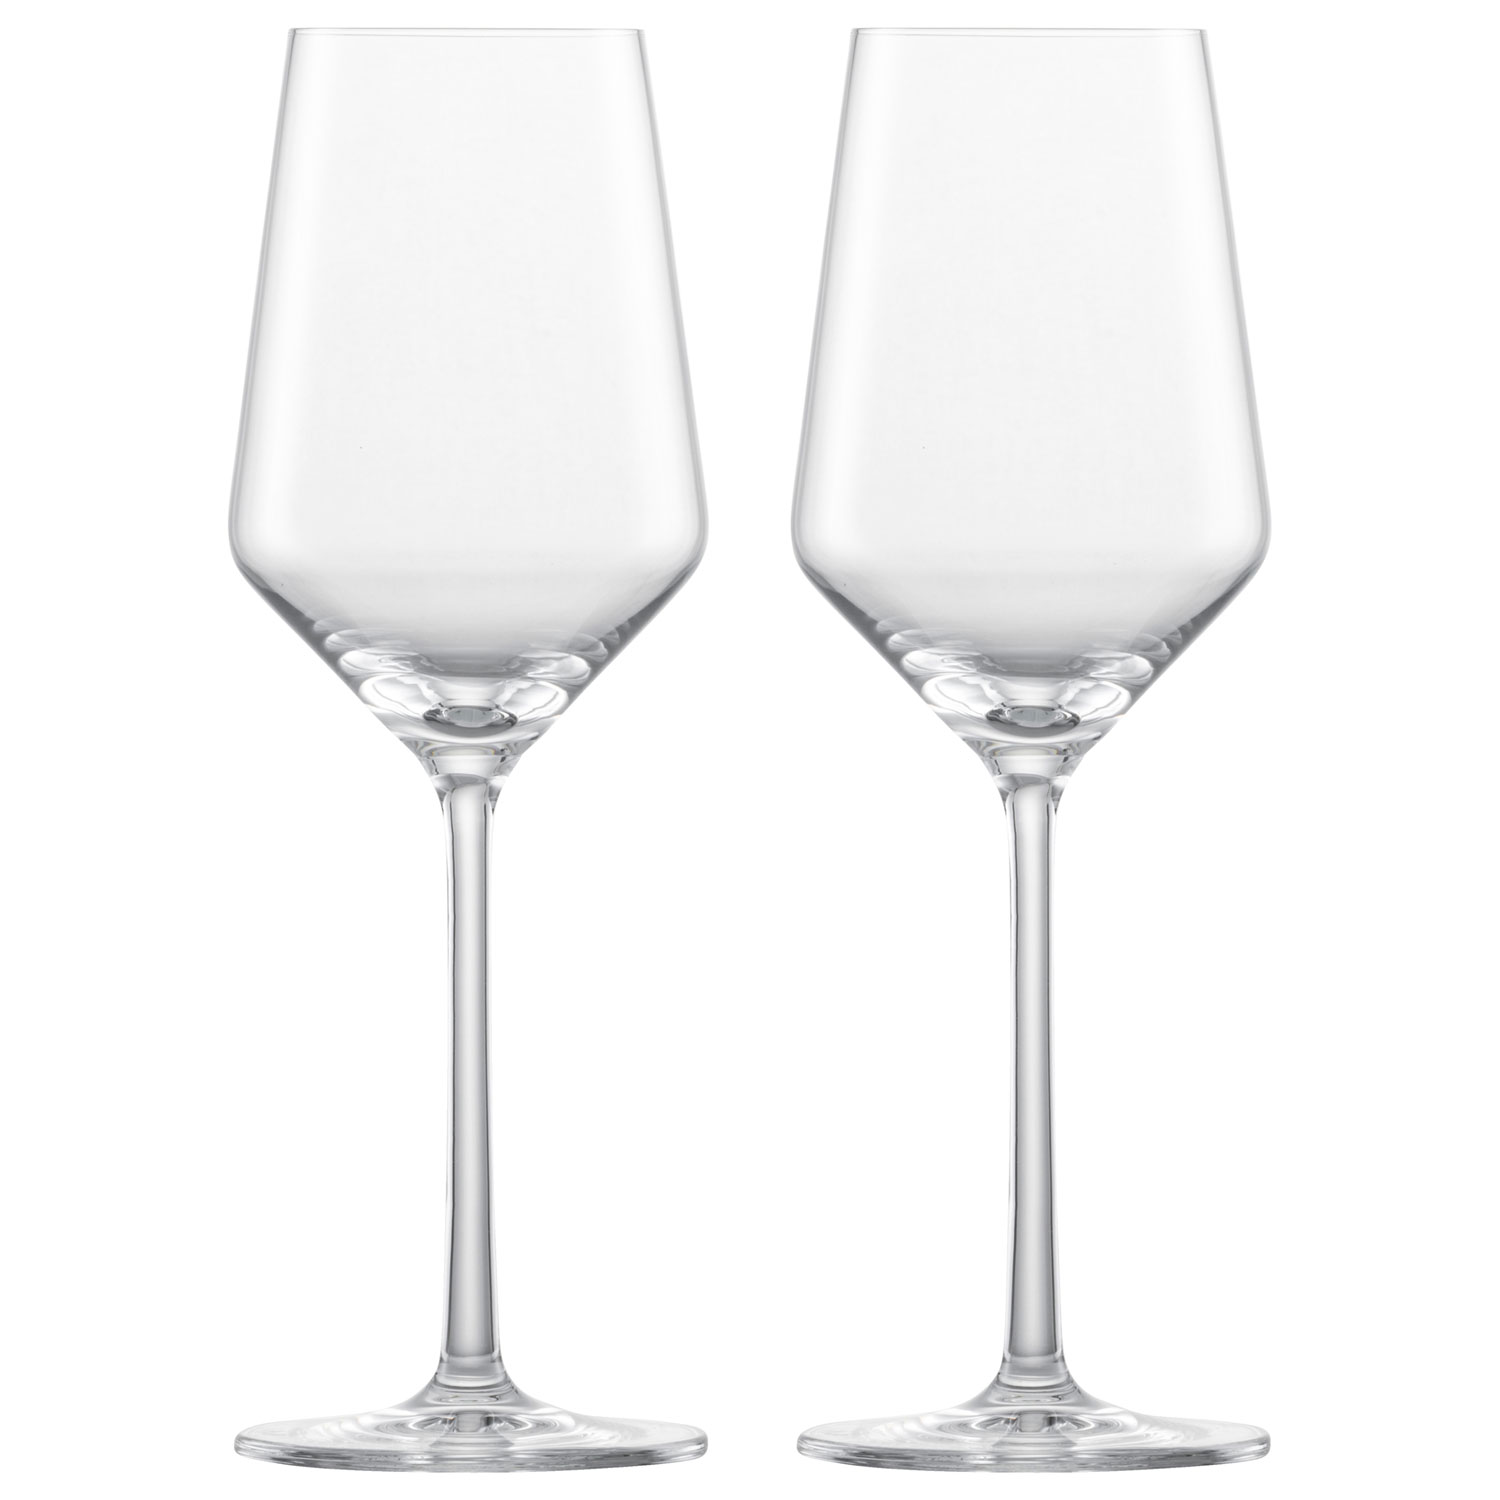 https://api-prod.royaldesign.se/api/products/image/2/zwiesel-pure-riesling-white-wine-glass-30-cl-2-pack-0